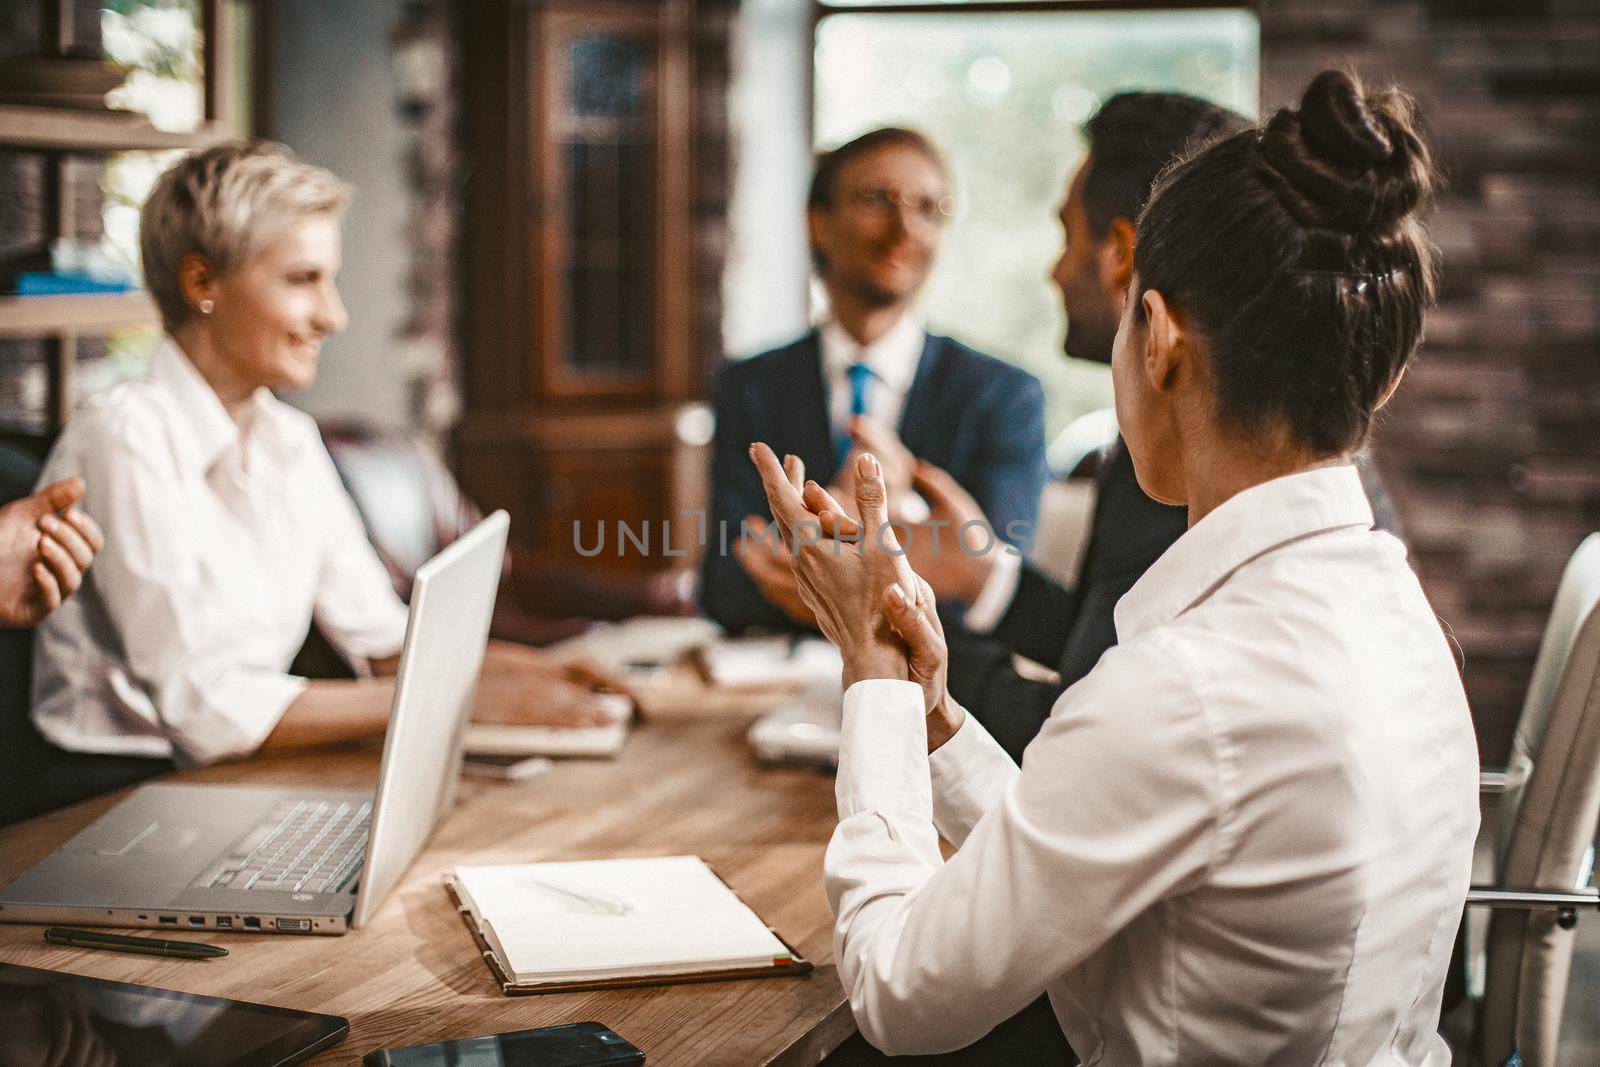 Teamwork Of Successful Business People, Selective Focus On Young Businesswoman Clapping With Her Hands, View From Back, Coworkers Team In Formalwear Working On Blurred Background, Toned Image